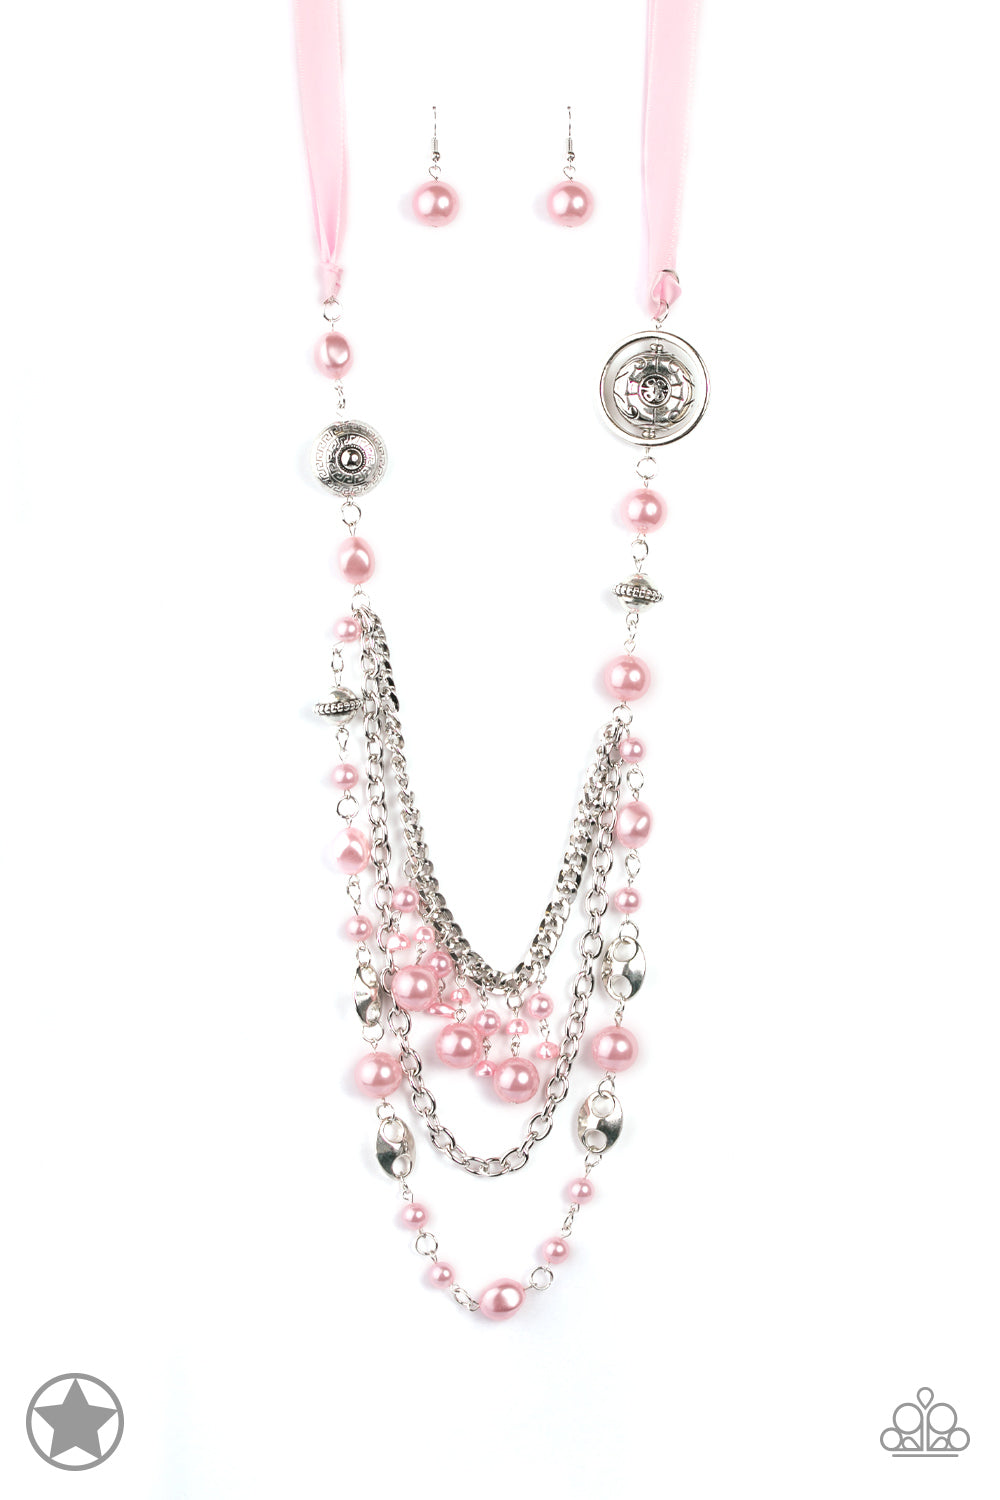 A silky pink ribbon replaces a traditional chain to give an elegant look. Pearly pastel pink beads and funky silver pieces intermix with varying lengths of silver chains to give a fresh take on a Victorian-inspired piece.  Sold as one individual necklace. Includes one pair of matching earrings.